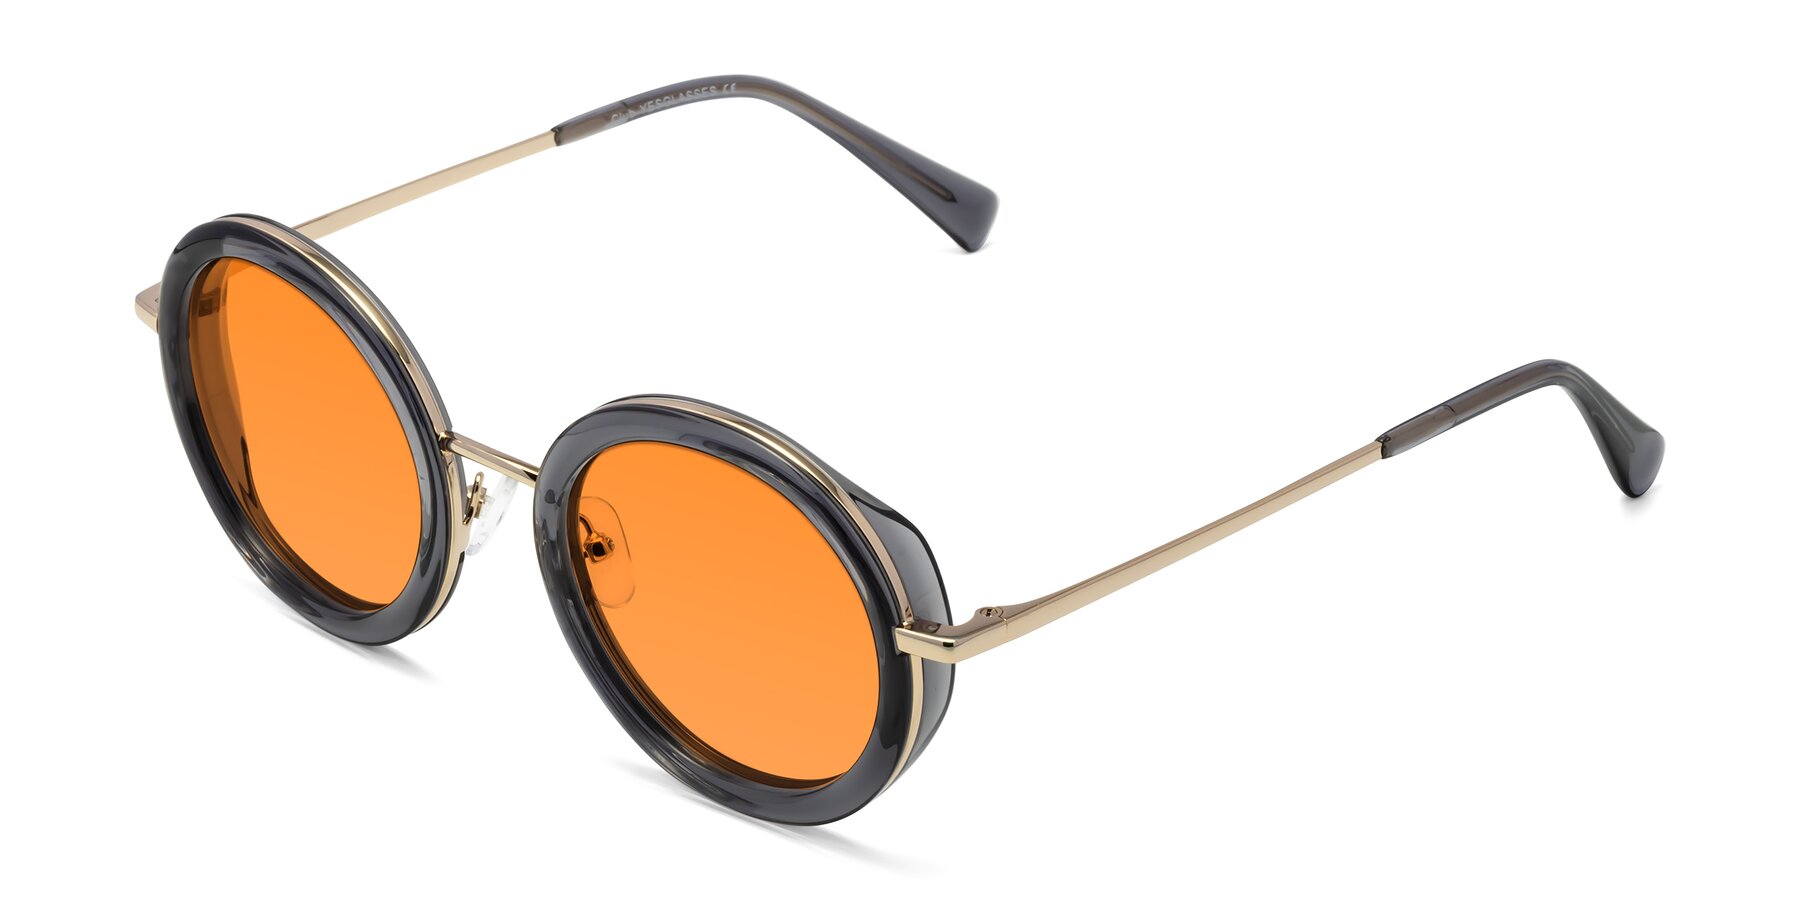 Angle of Club in Gray-Gold with Orange Tinted Lenses